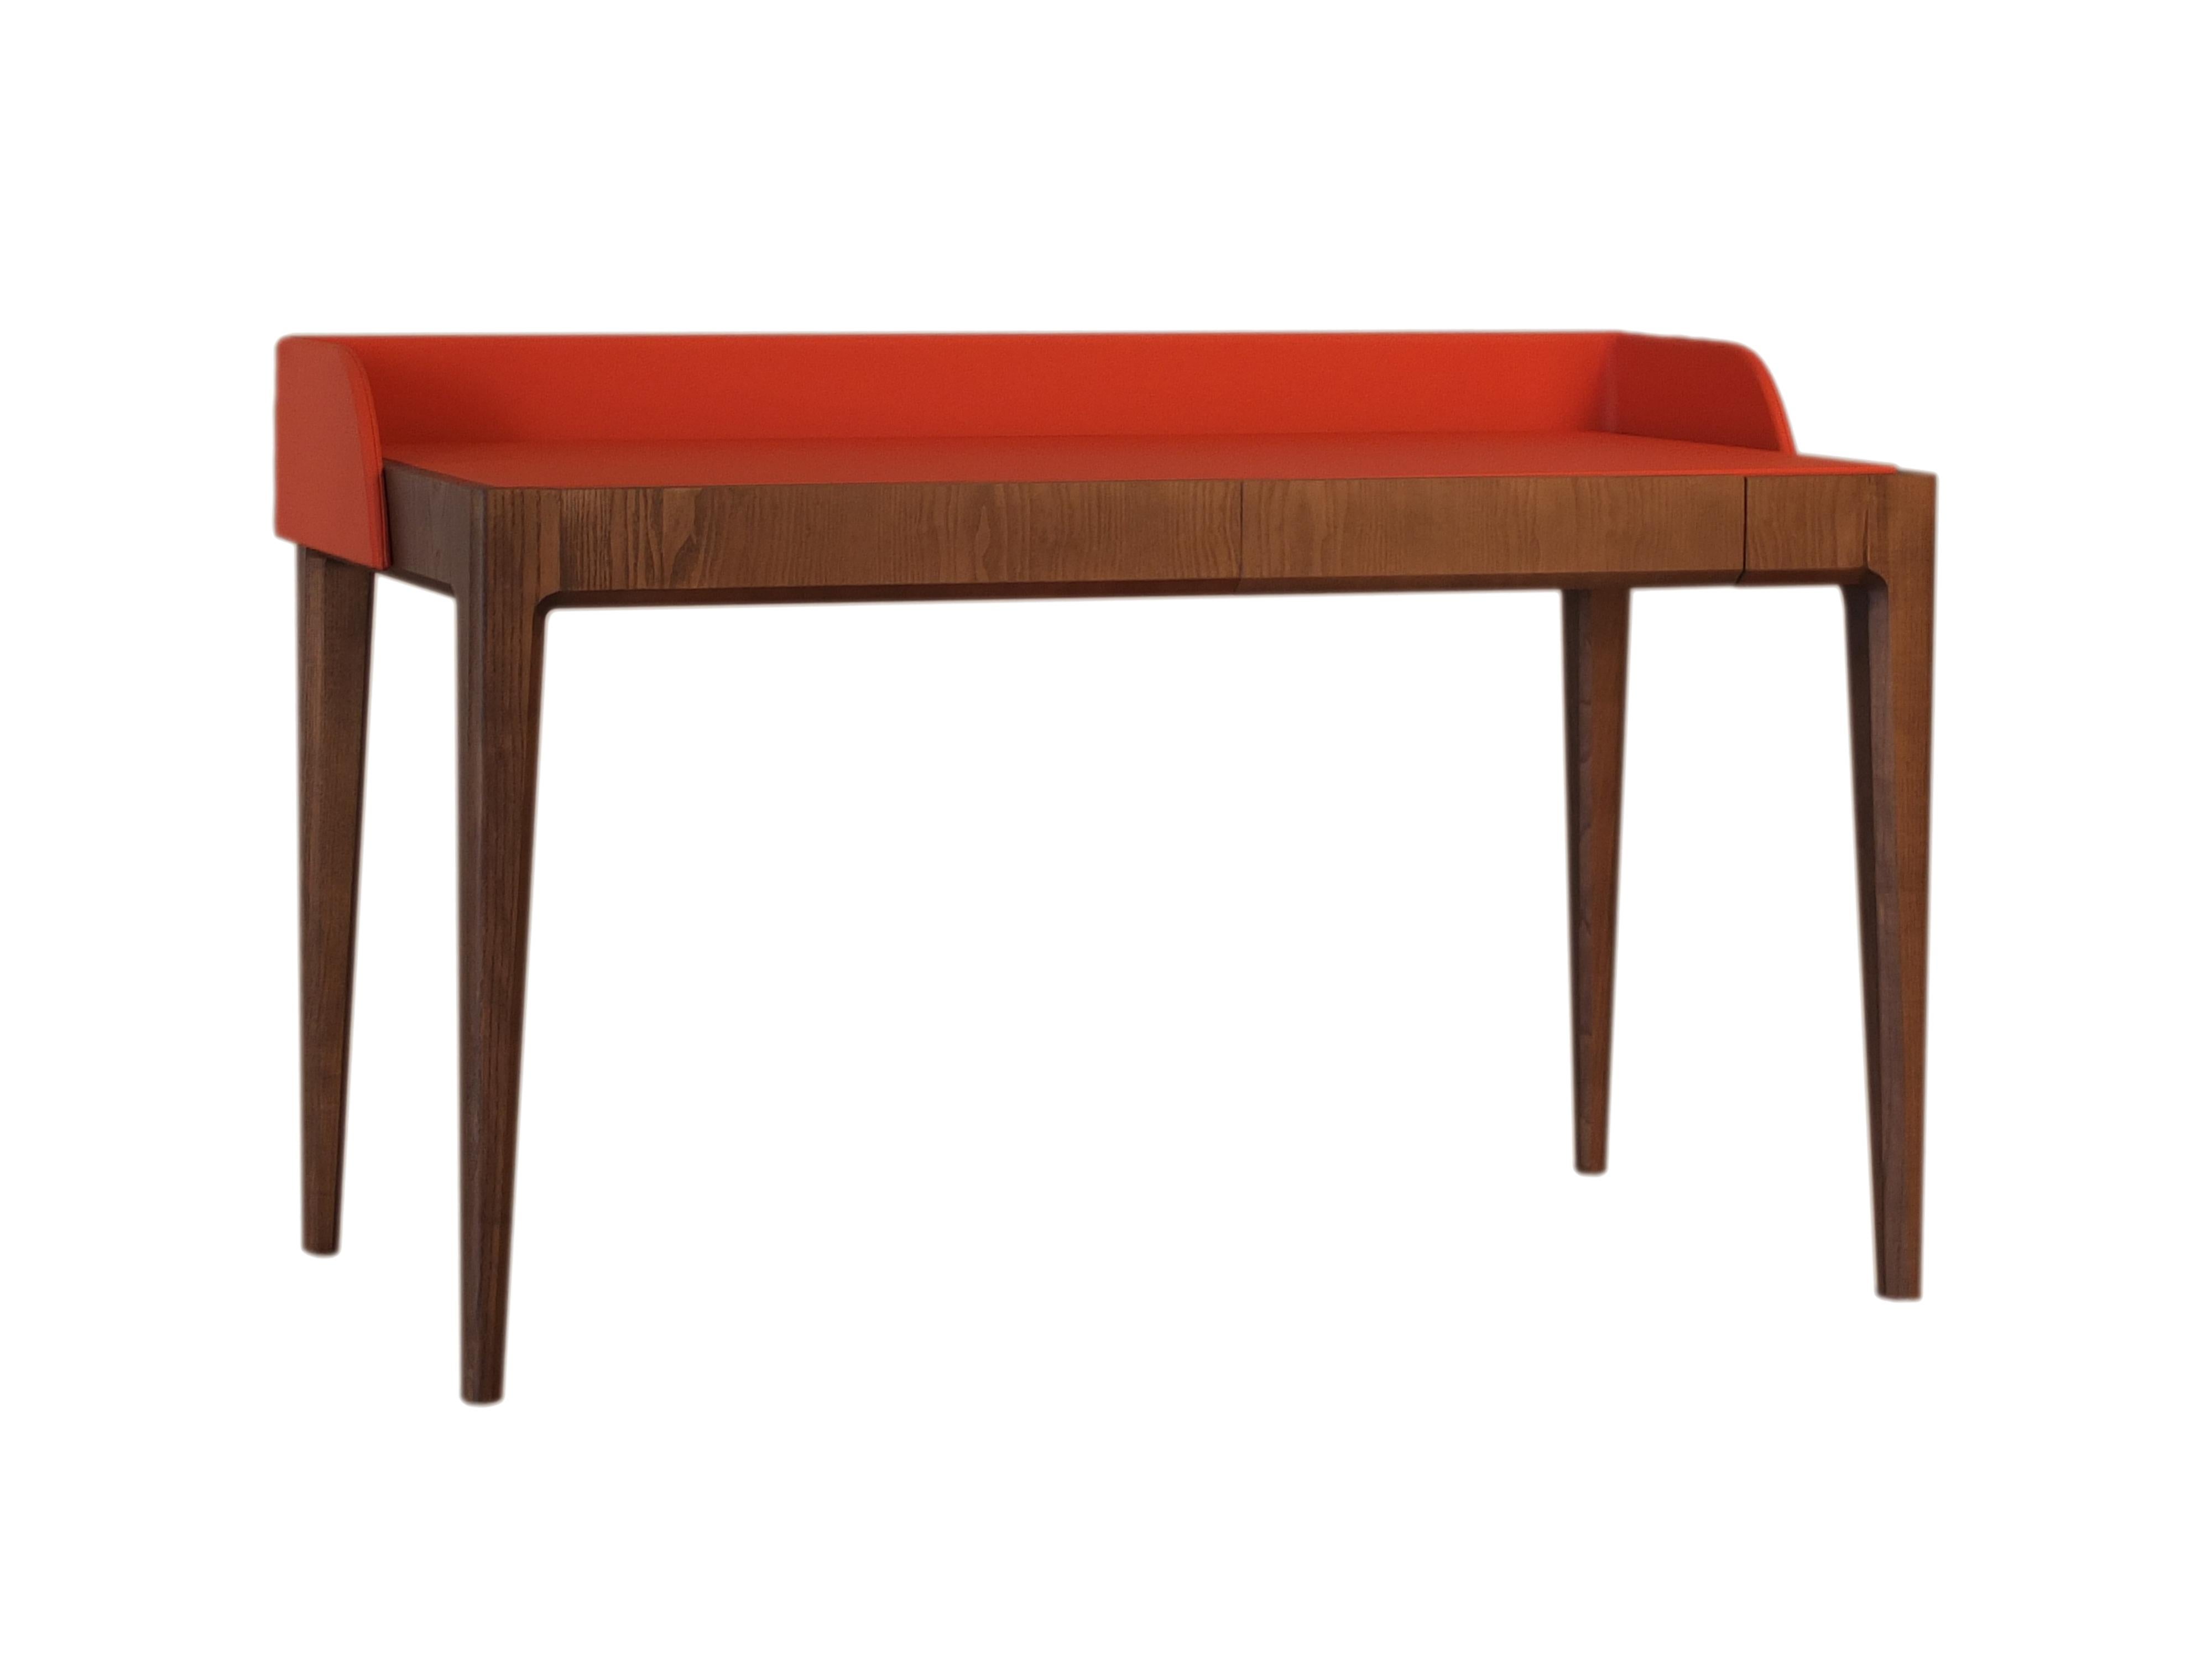 Contemporary Desk Made of Ashwood with Leather Flapping Top, by Morelato 1